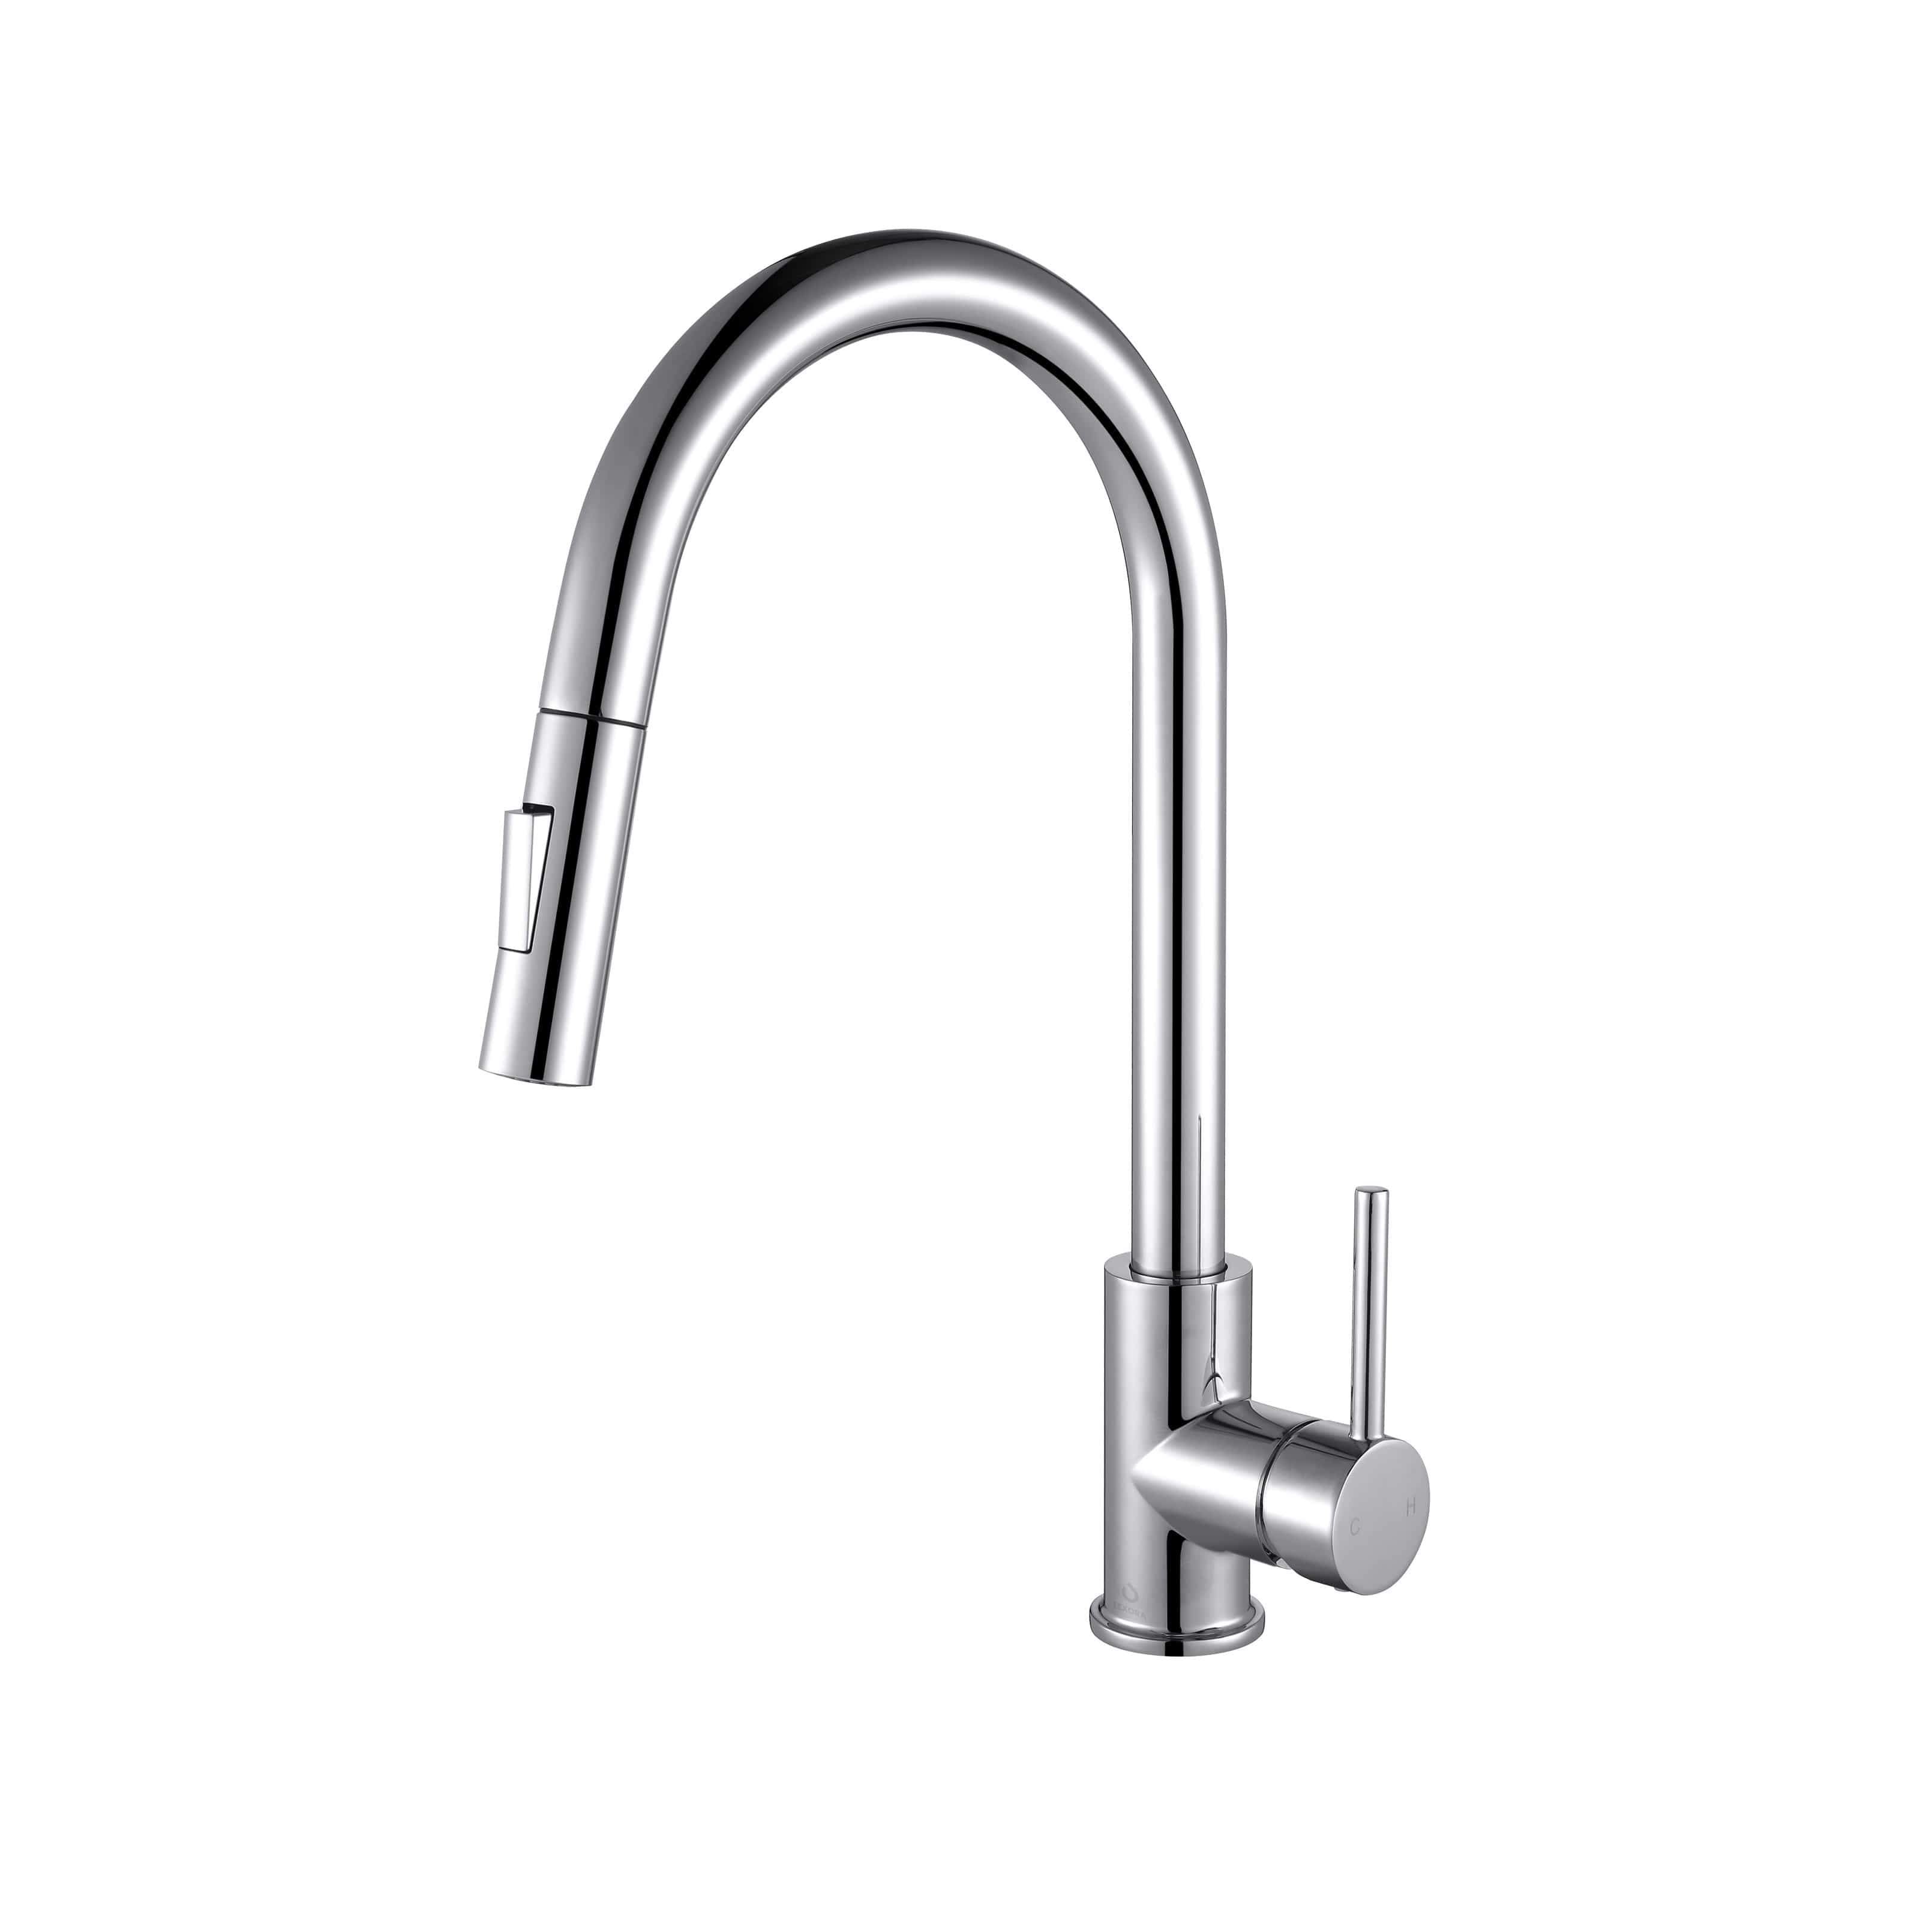 Bell + Modern Faucet Acadia Brass Kitchen Faucet w/ Pull Out Sprayer Chrome